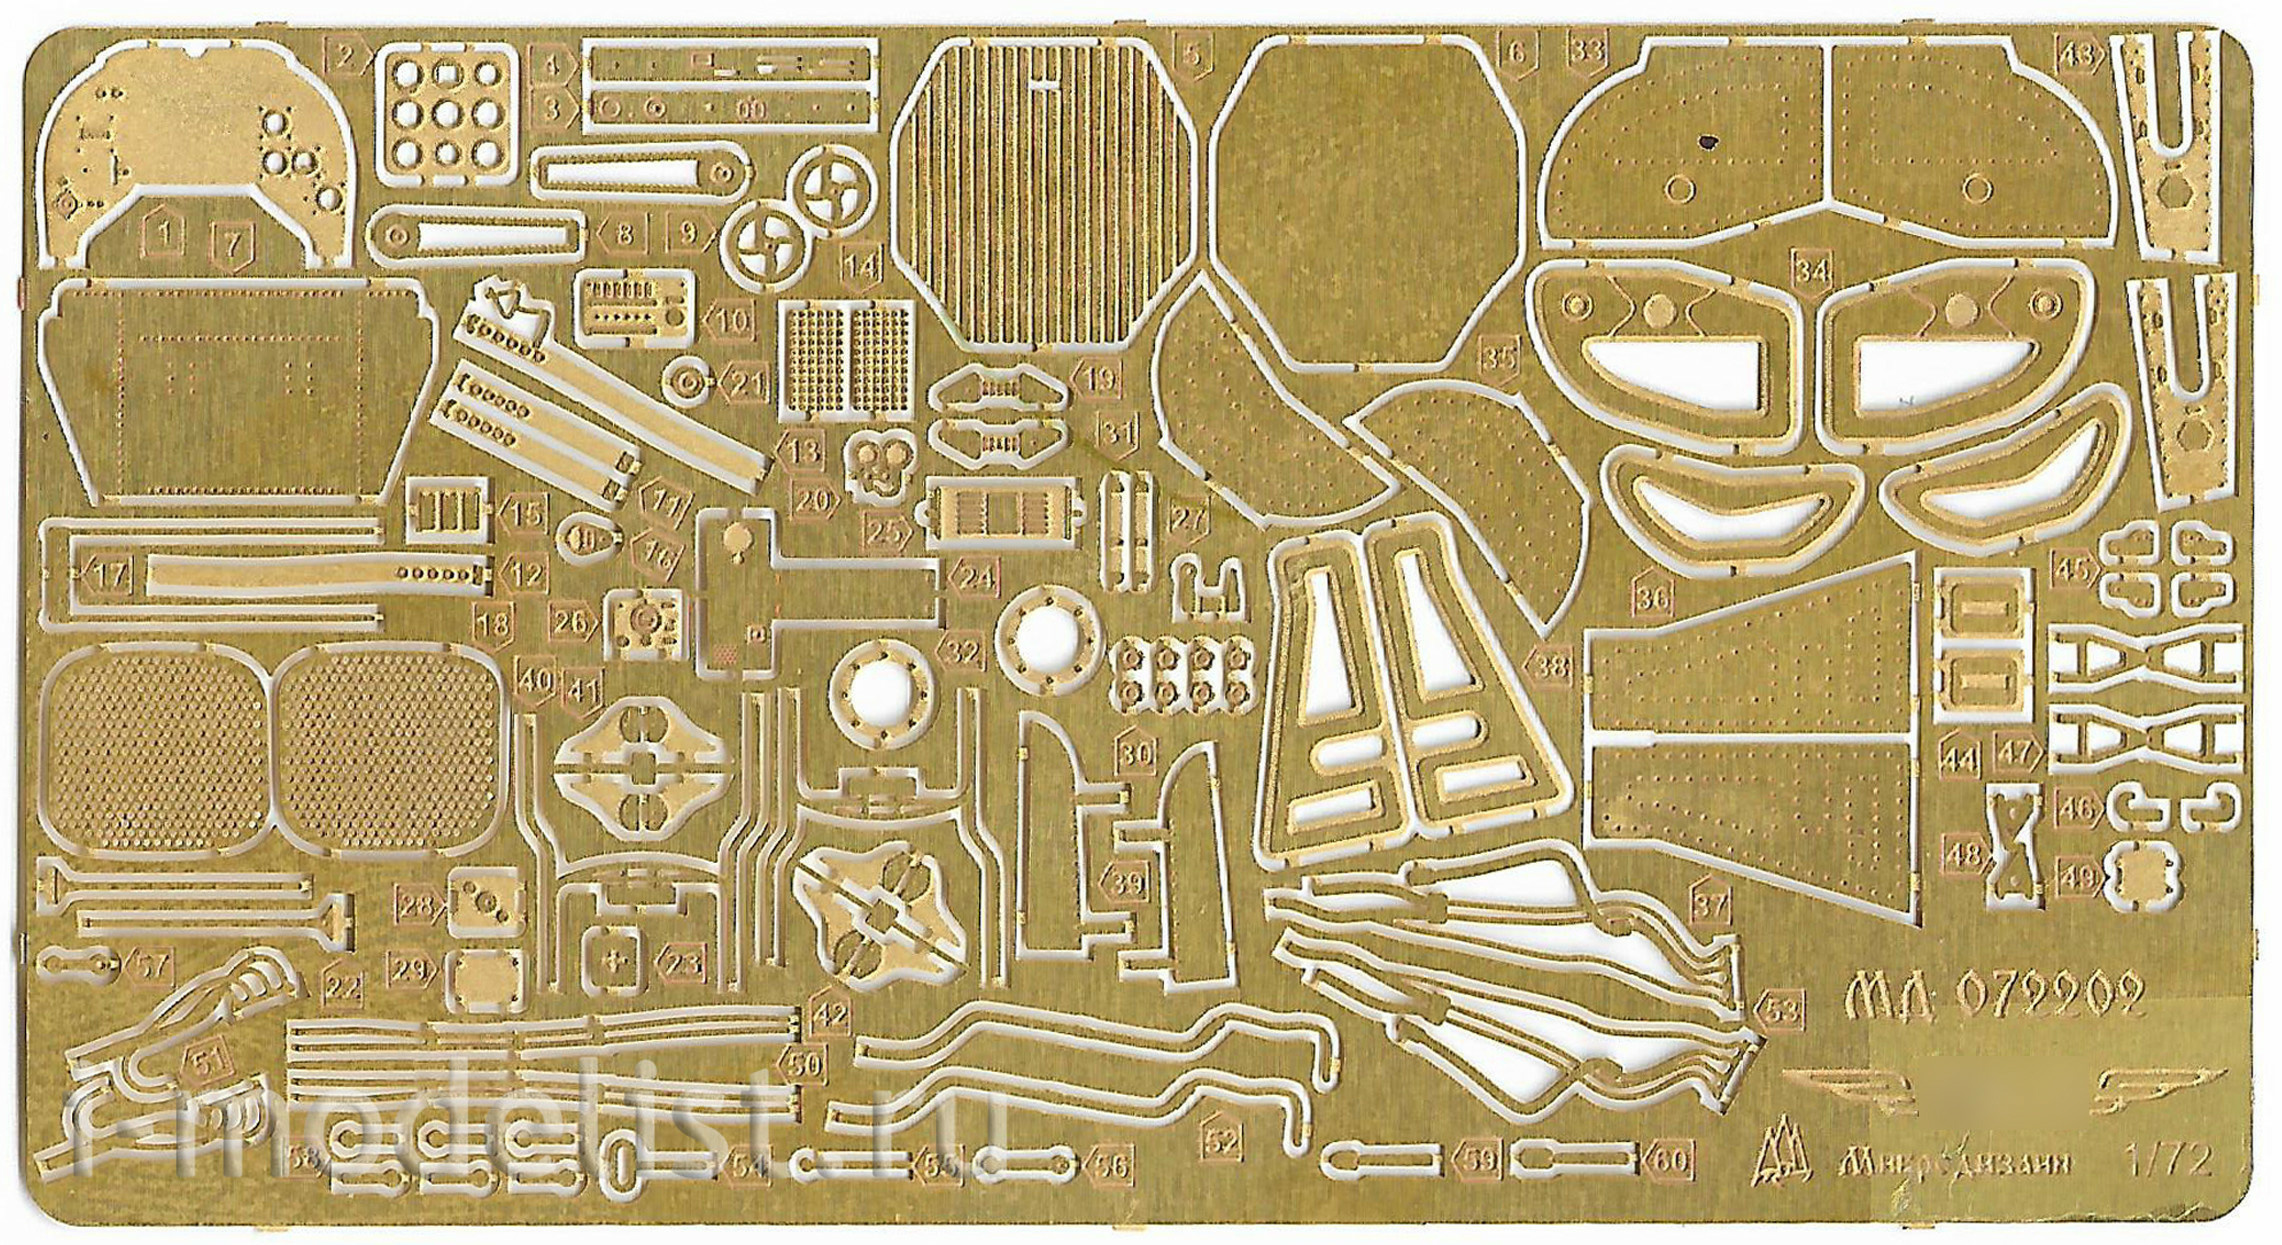 072202 Microdesign 1/72 photo etched parts for the Yakovlev-3 Zvezdas